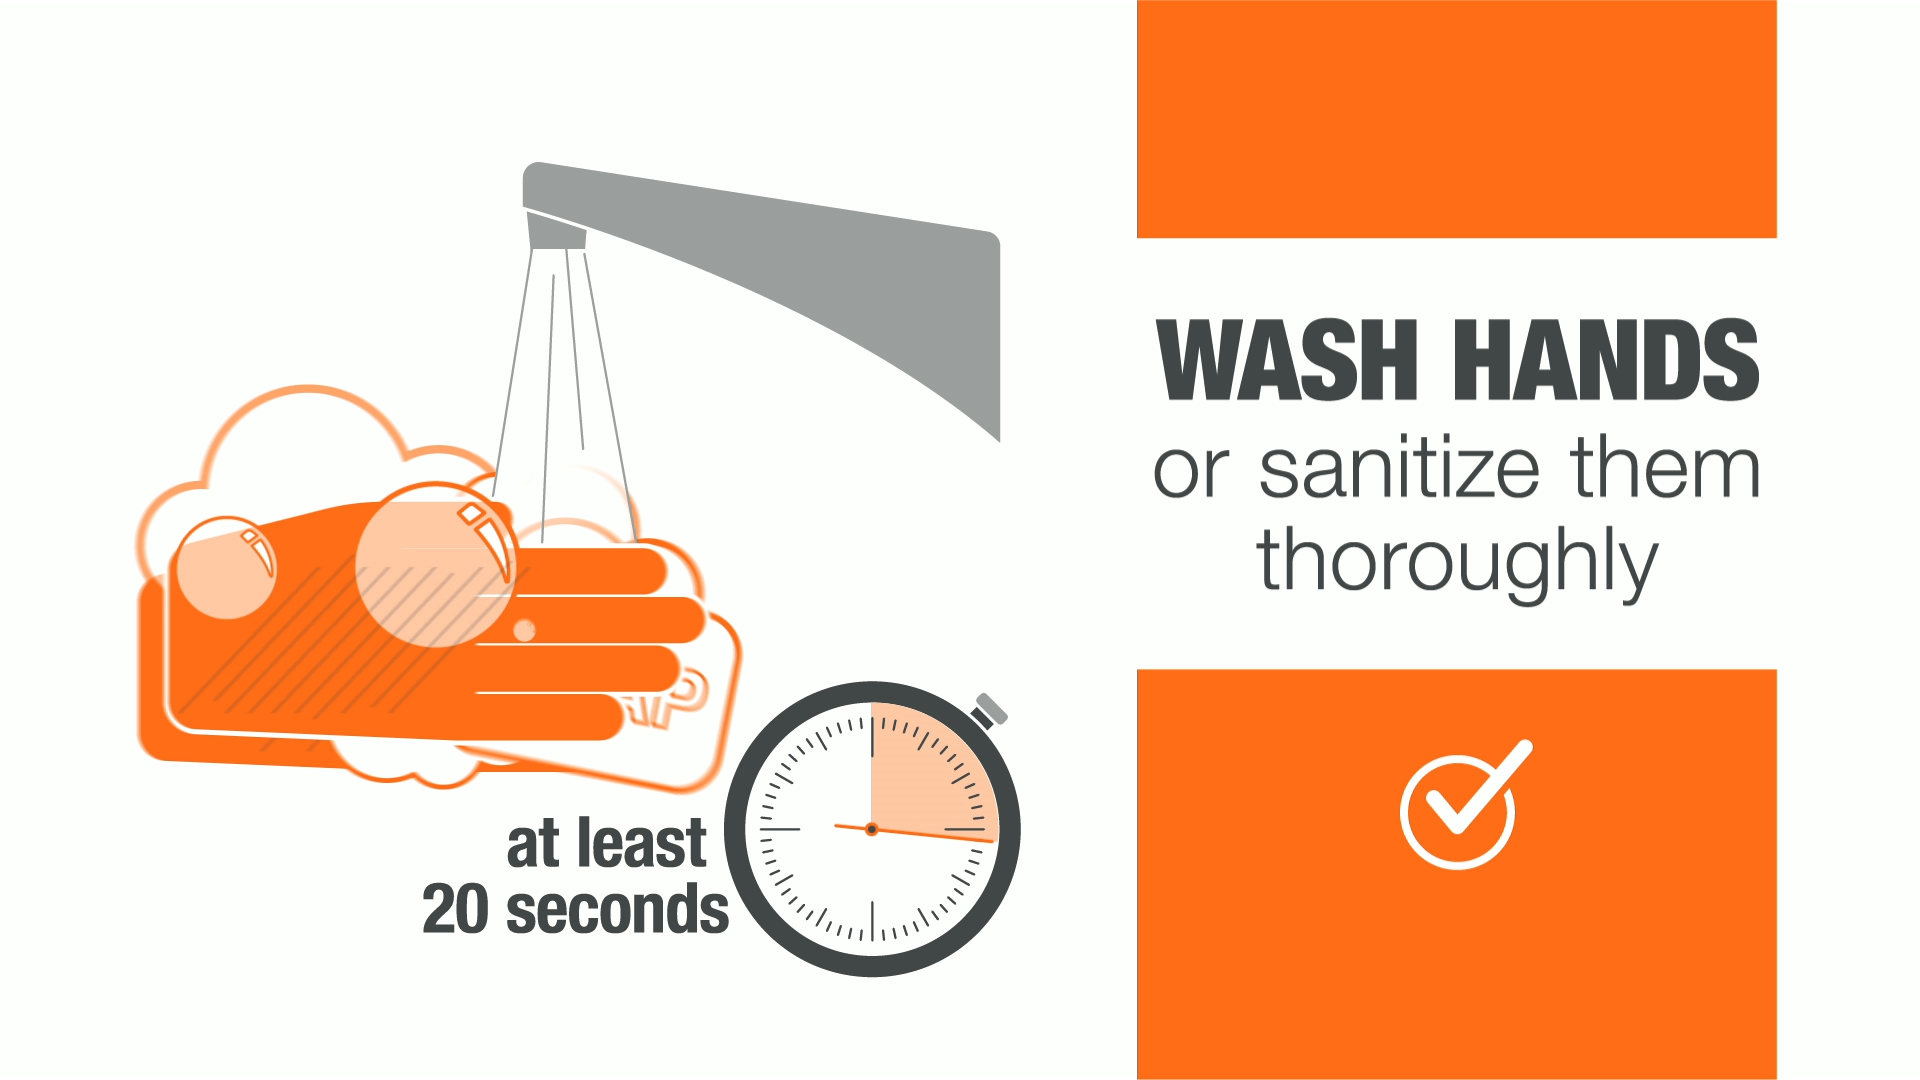 Wash hands or sanitize them thoroughly at least 20 seconds